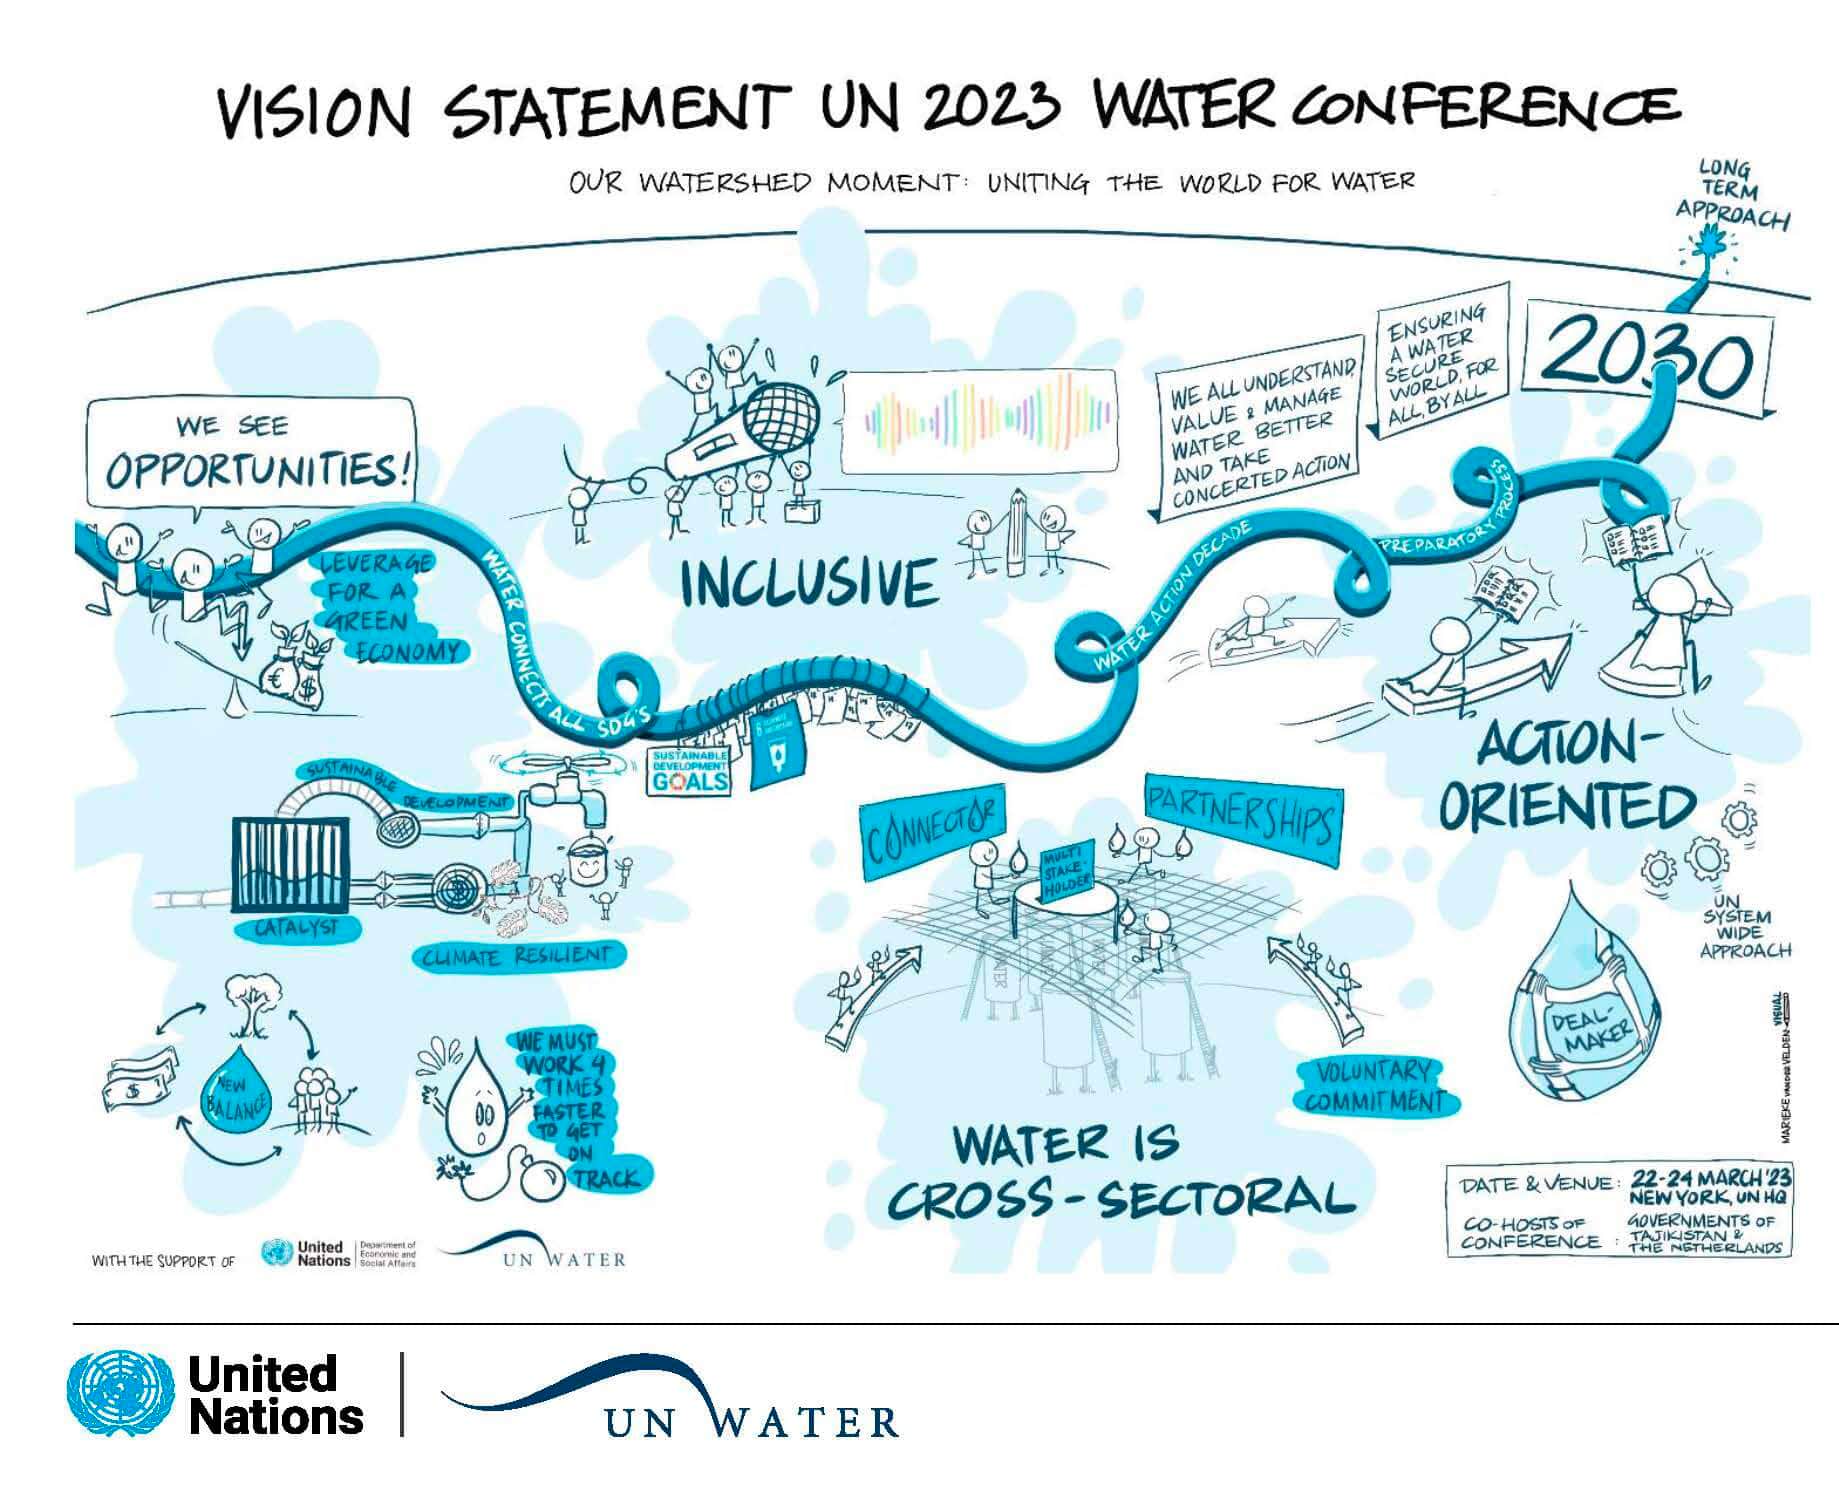 Vision Statement un 2023 Water Conference